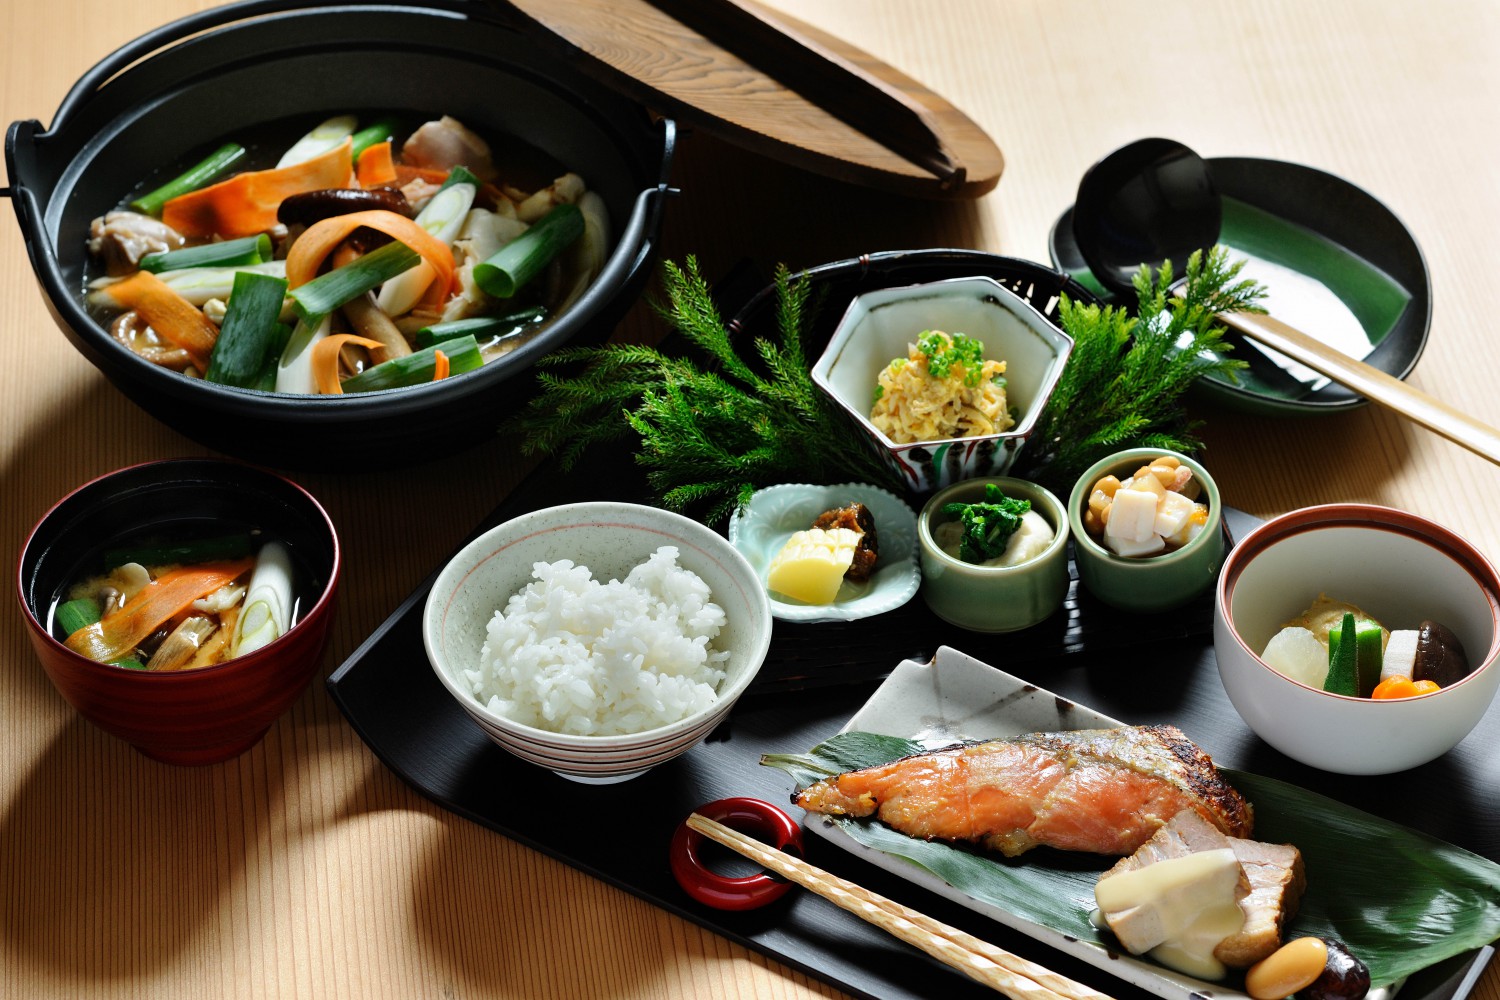 ▲ Shio no Michi Breakfast A breakfast menu associated with the area that once prospered as a post town of "Shio no Michi".A well-balanced balance of seafood and mountain food, such as simmered with salted squid and miso soup with plenty of mushrooms.